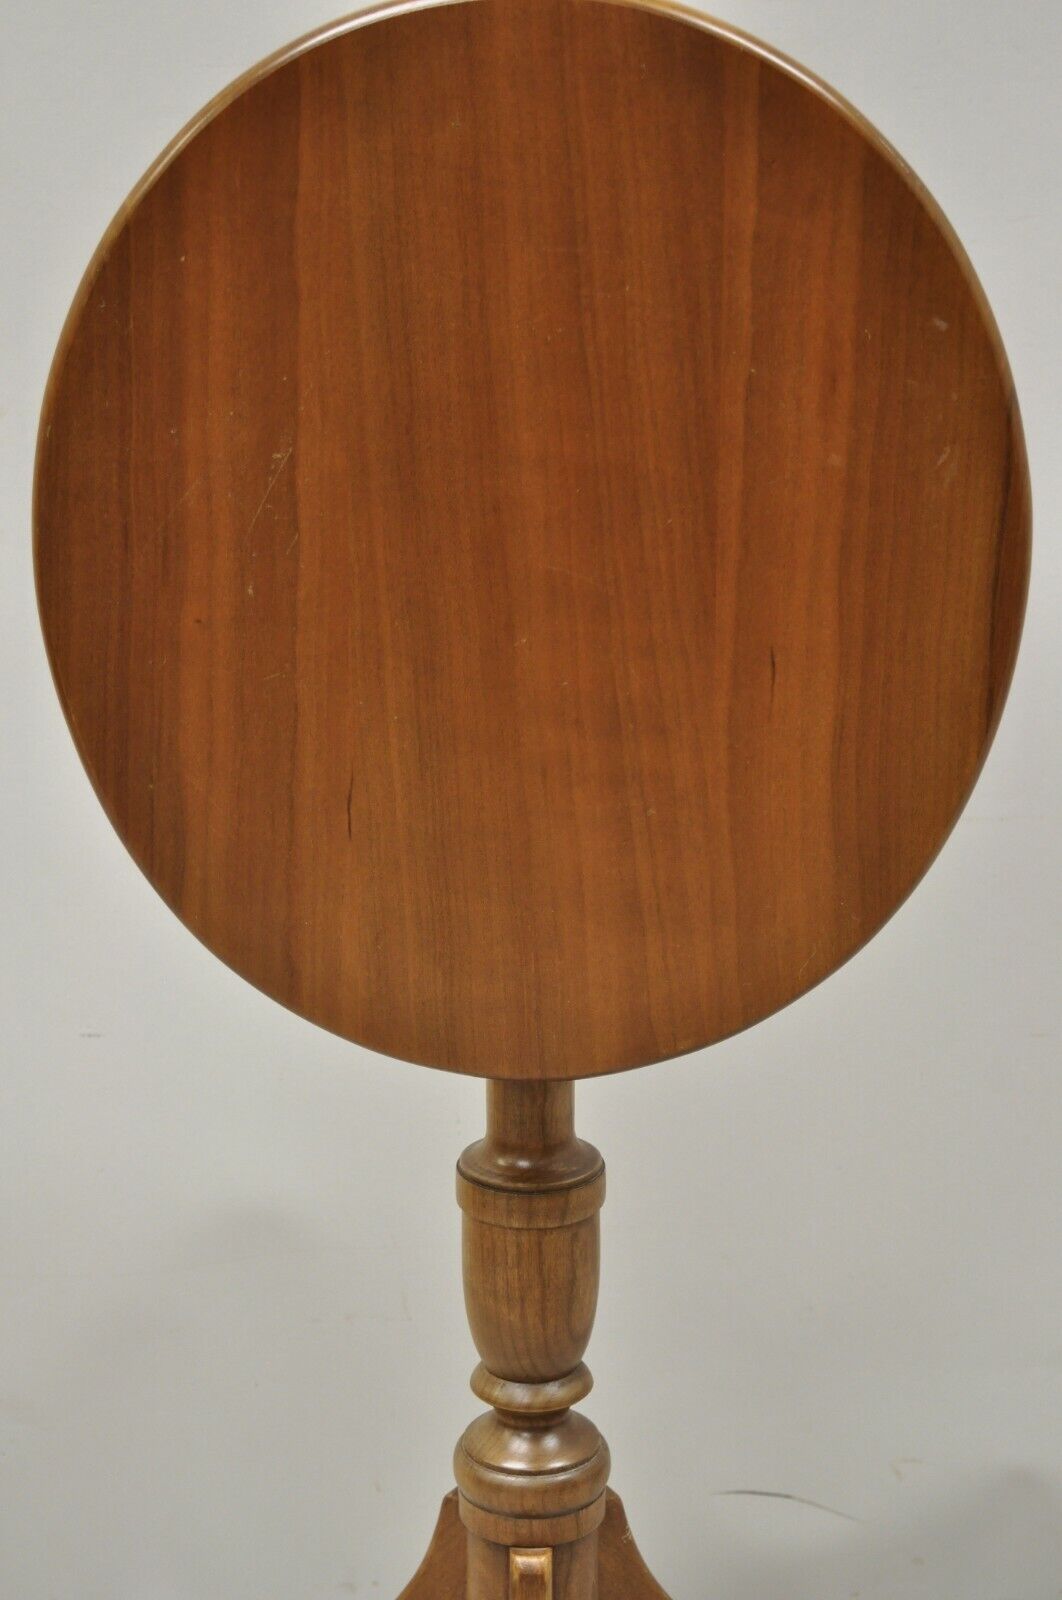 Solid Cherry Wood Tilt Top Tea Table Sheraton Federal Style by Norm Baylis